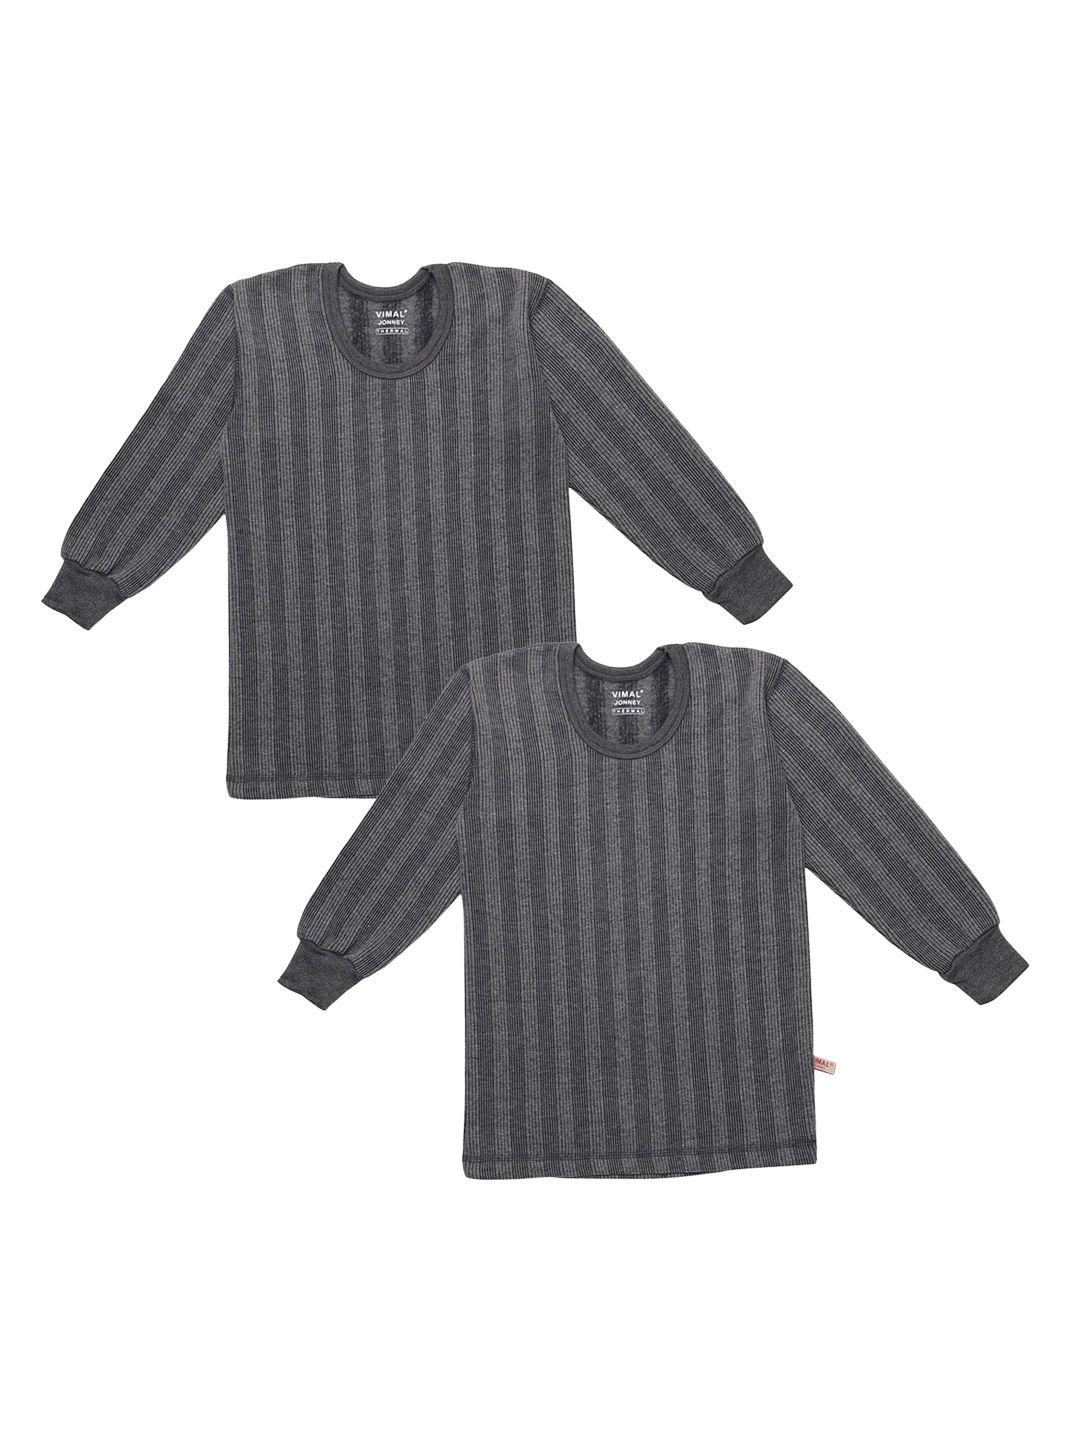 vimal-jonney-infant-kids-pack-of-2-striped-cotton-thermal-tops